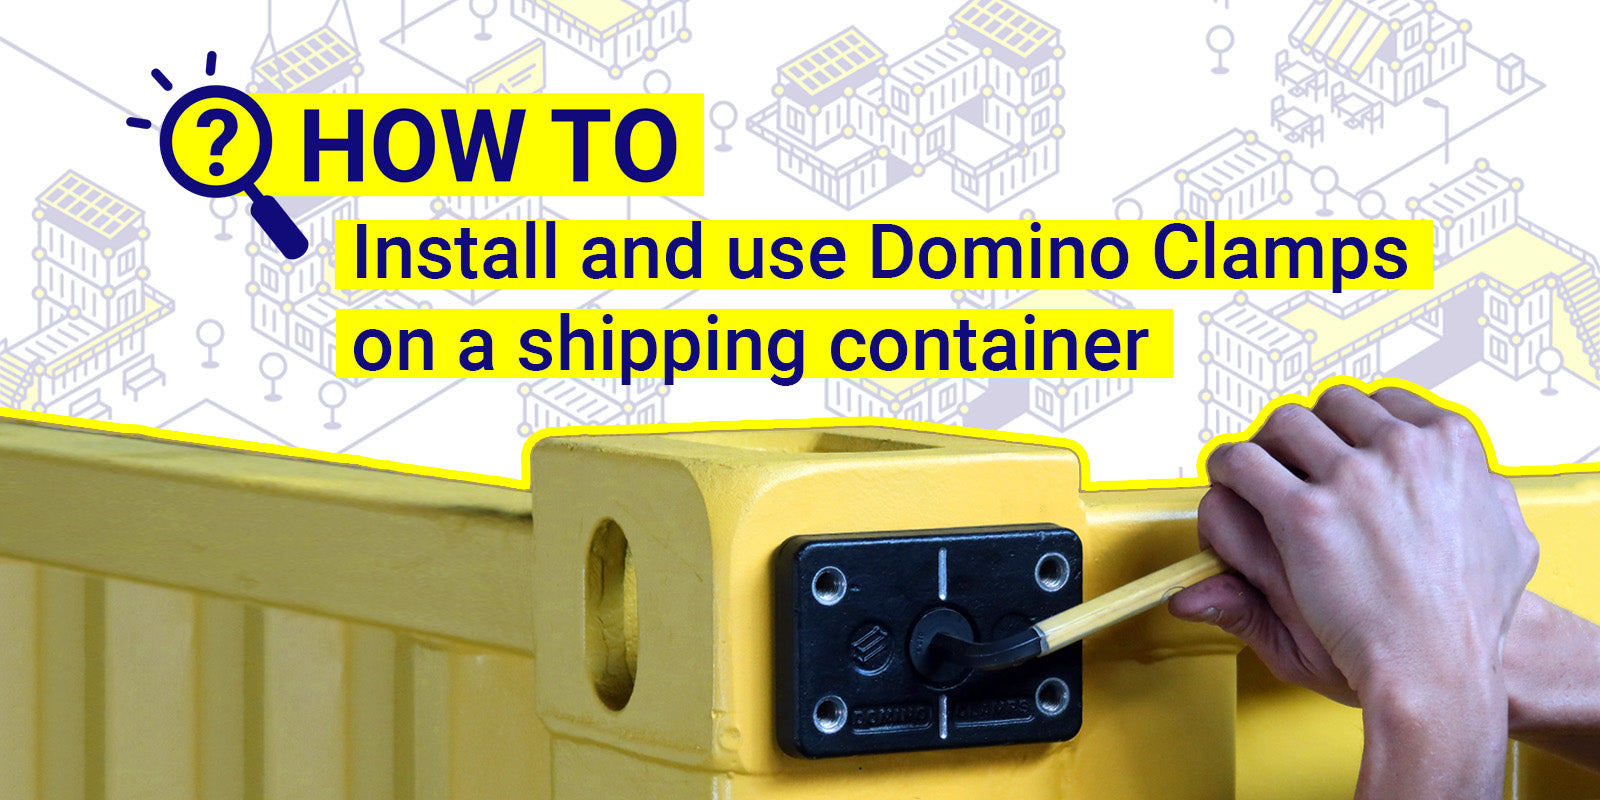 How to install and use Domino Clamps on a shipping container.